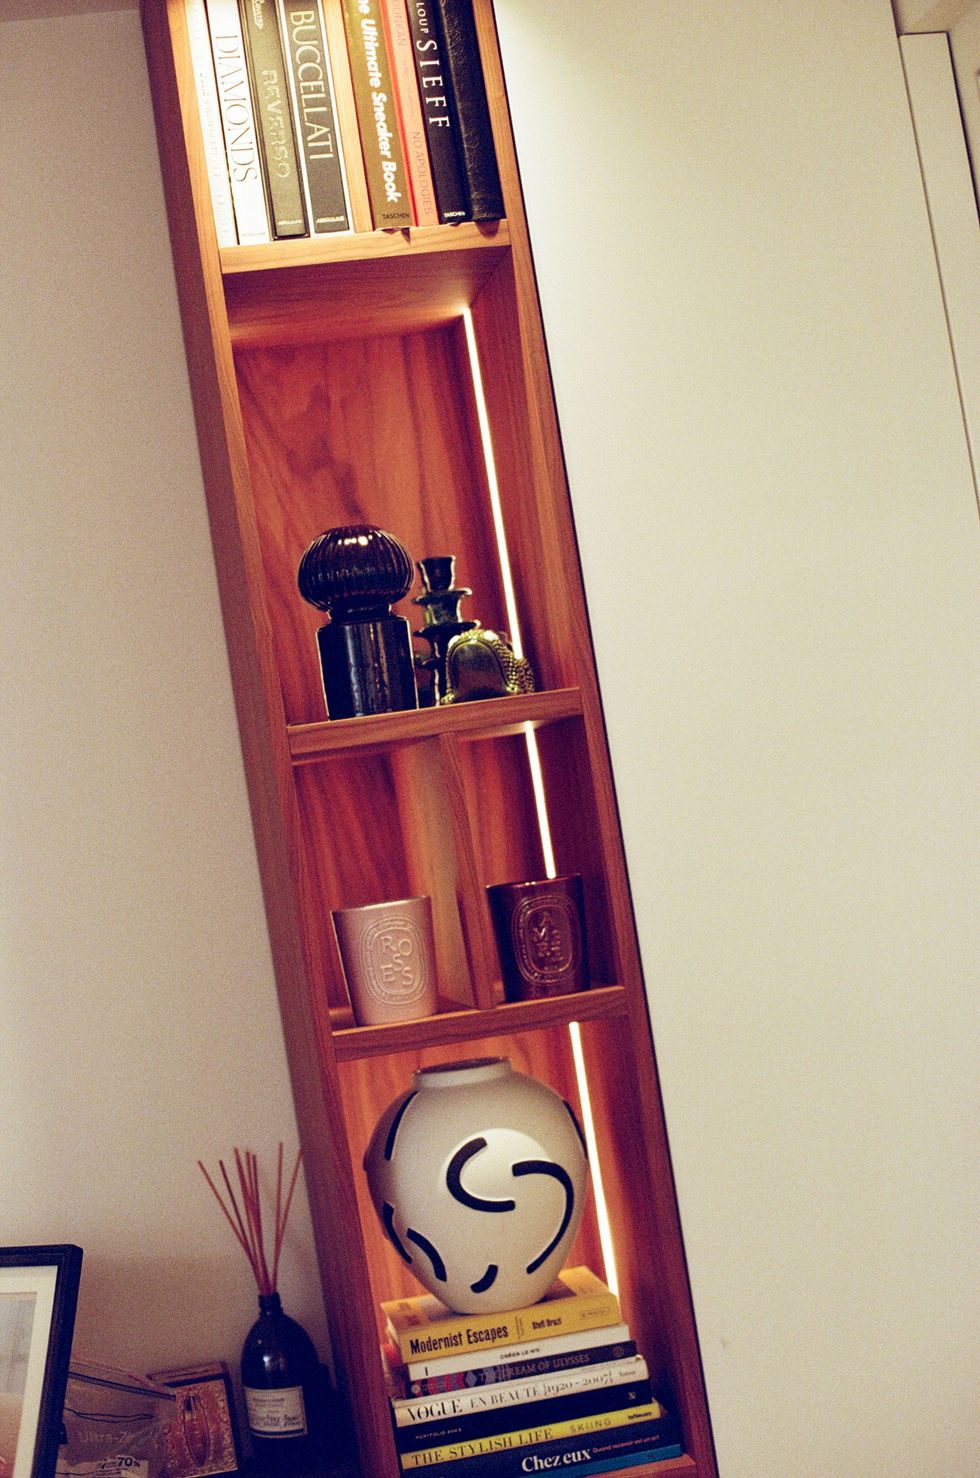 a book shelf with books and a bottle of wine